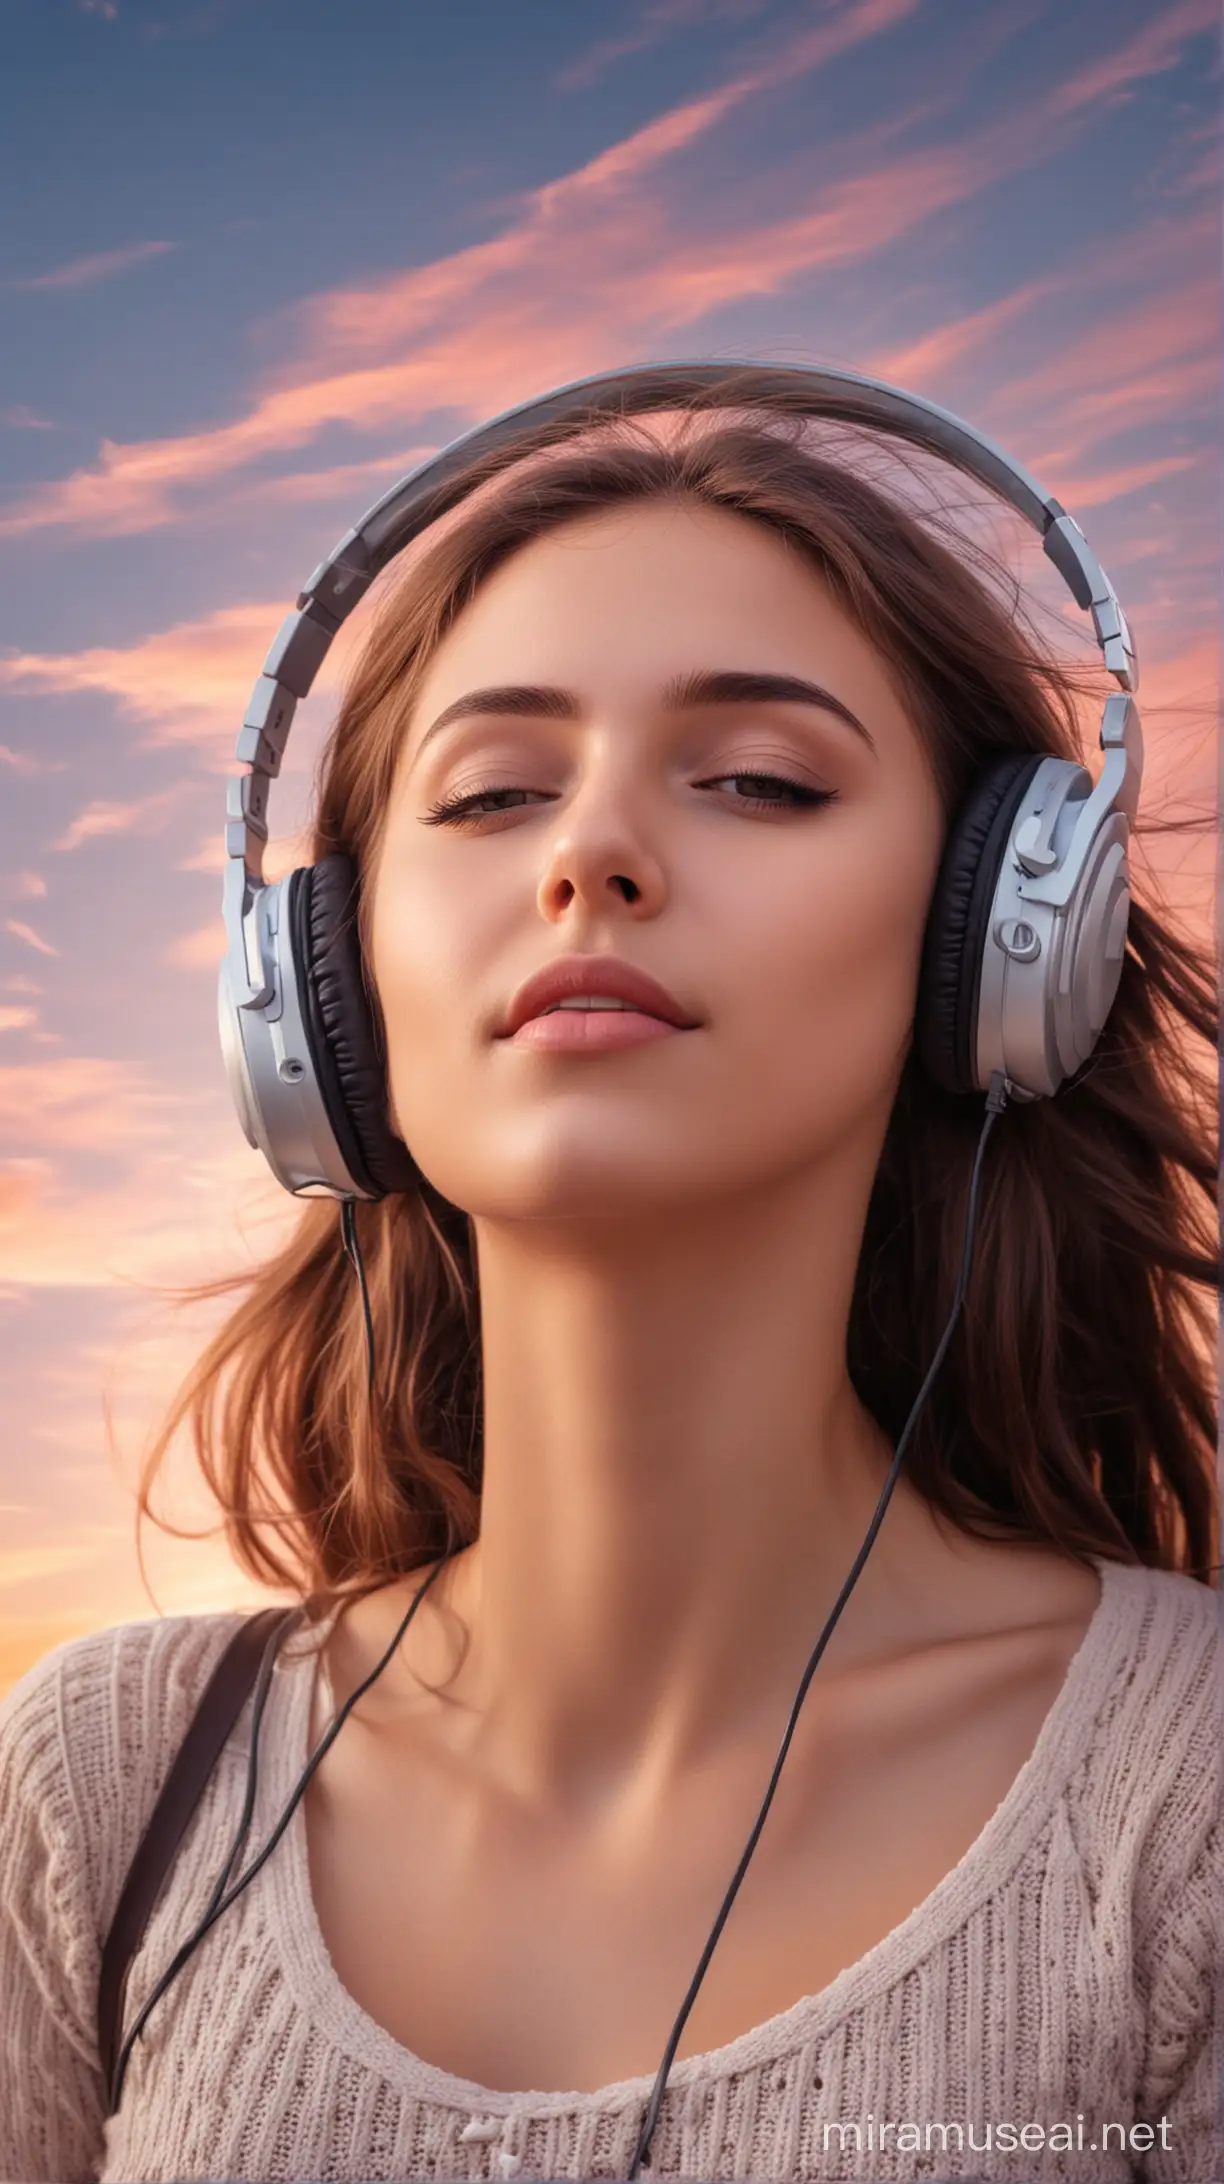 rapid heartbeat. image of a dreamy girl in love. with headphones and looking dreamily at the sky.